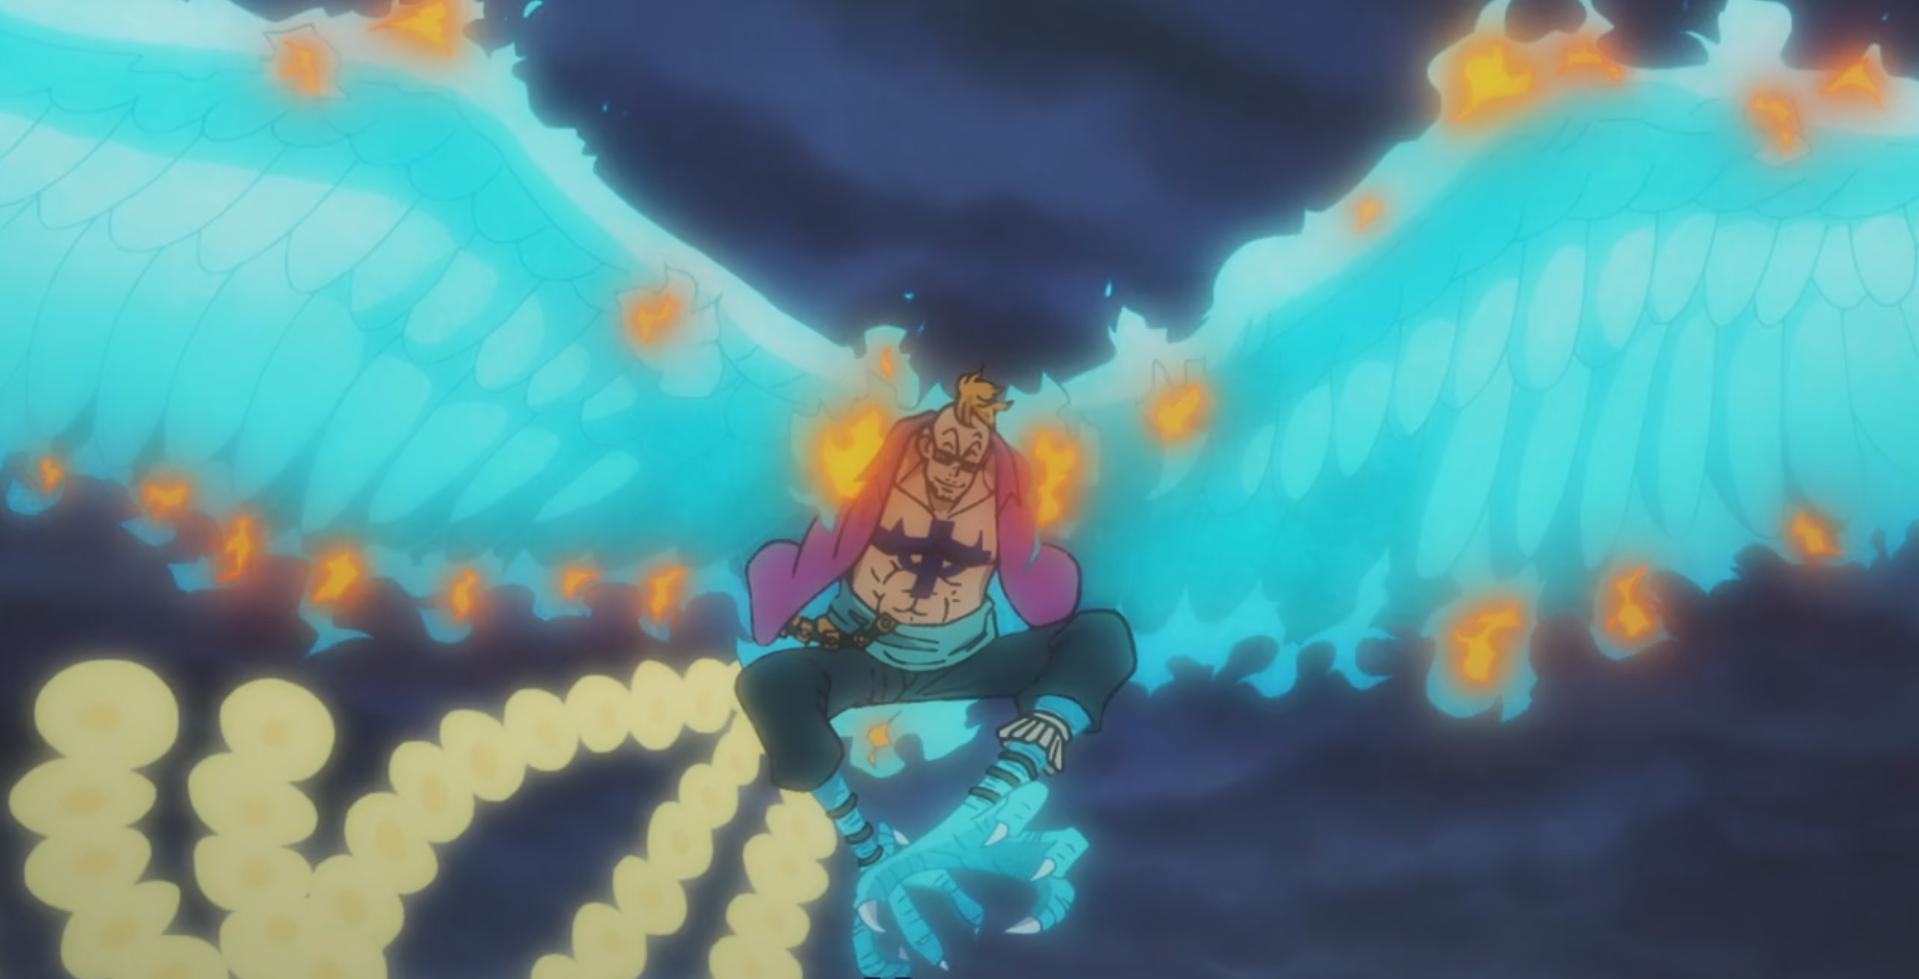 This coming Sunday, One Piece Episode - The Will of Marco